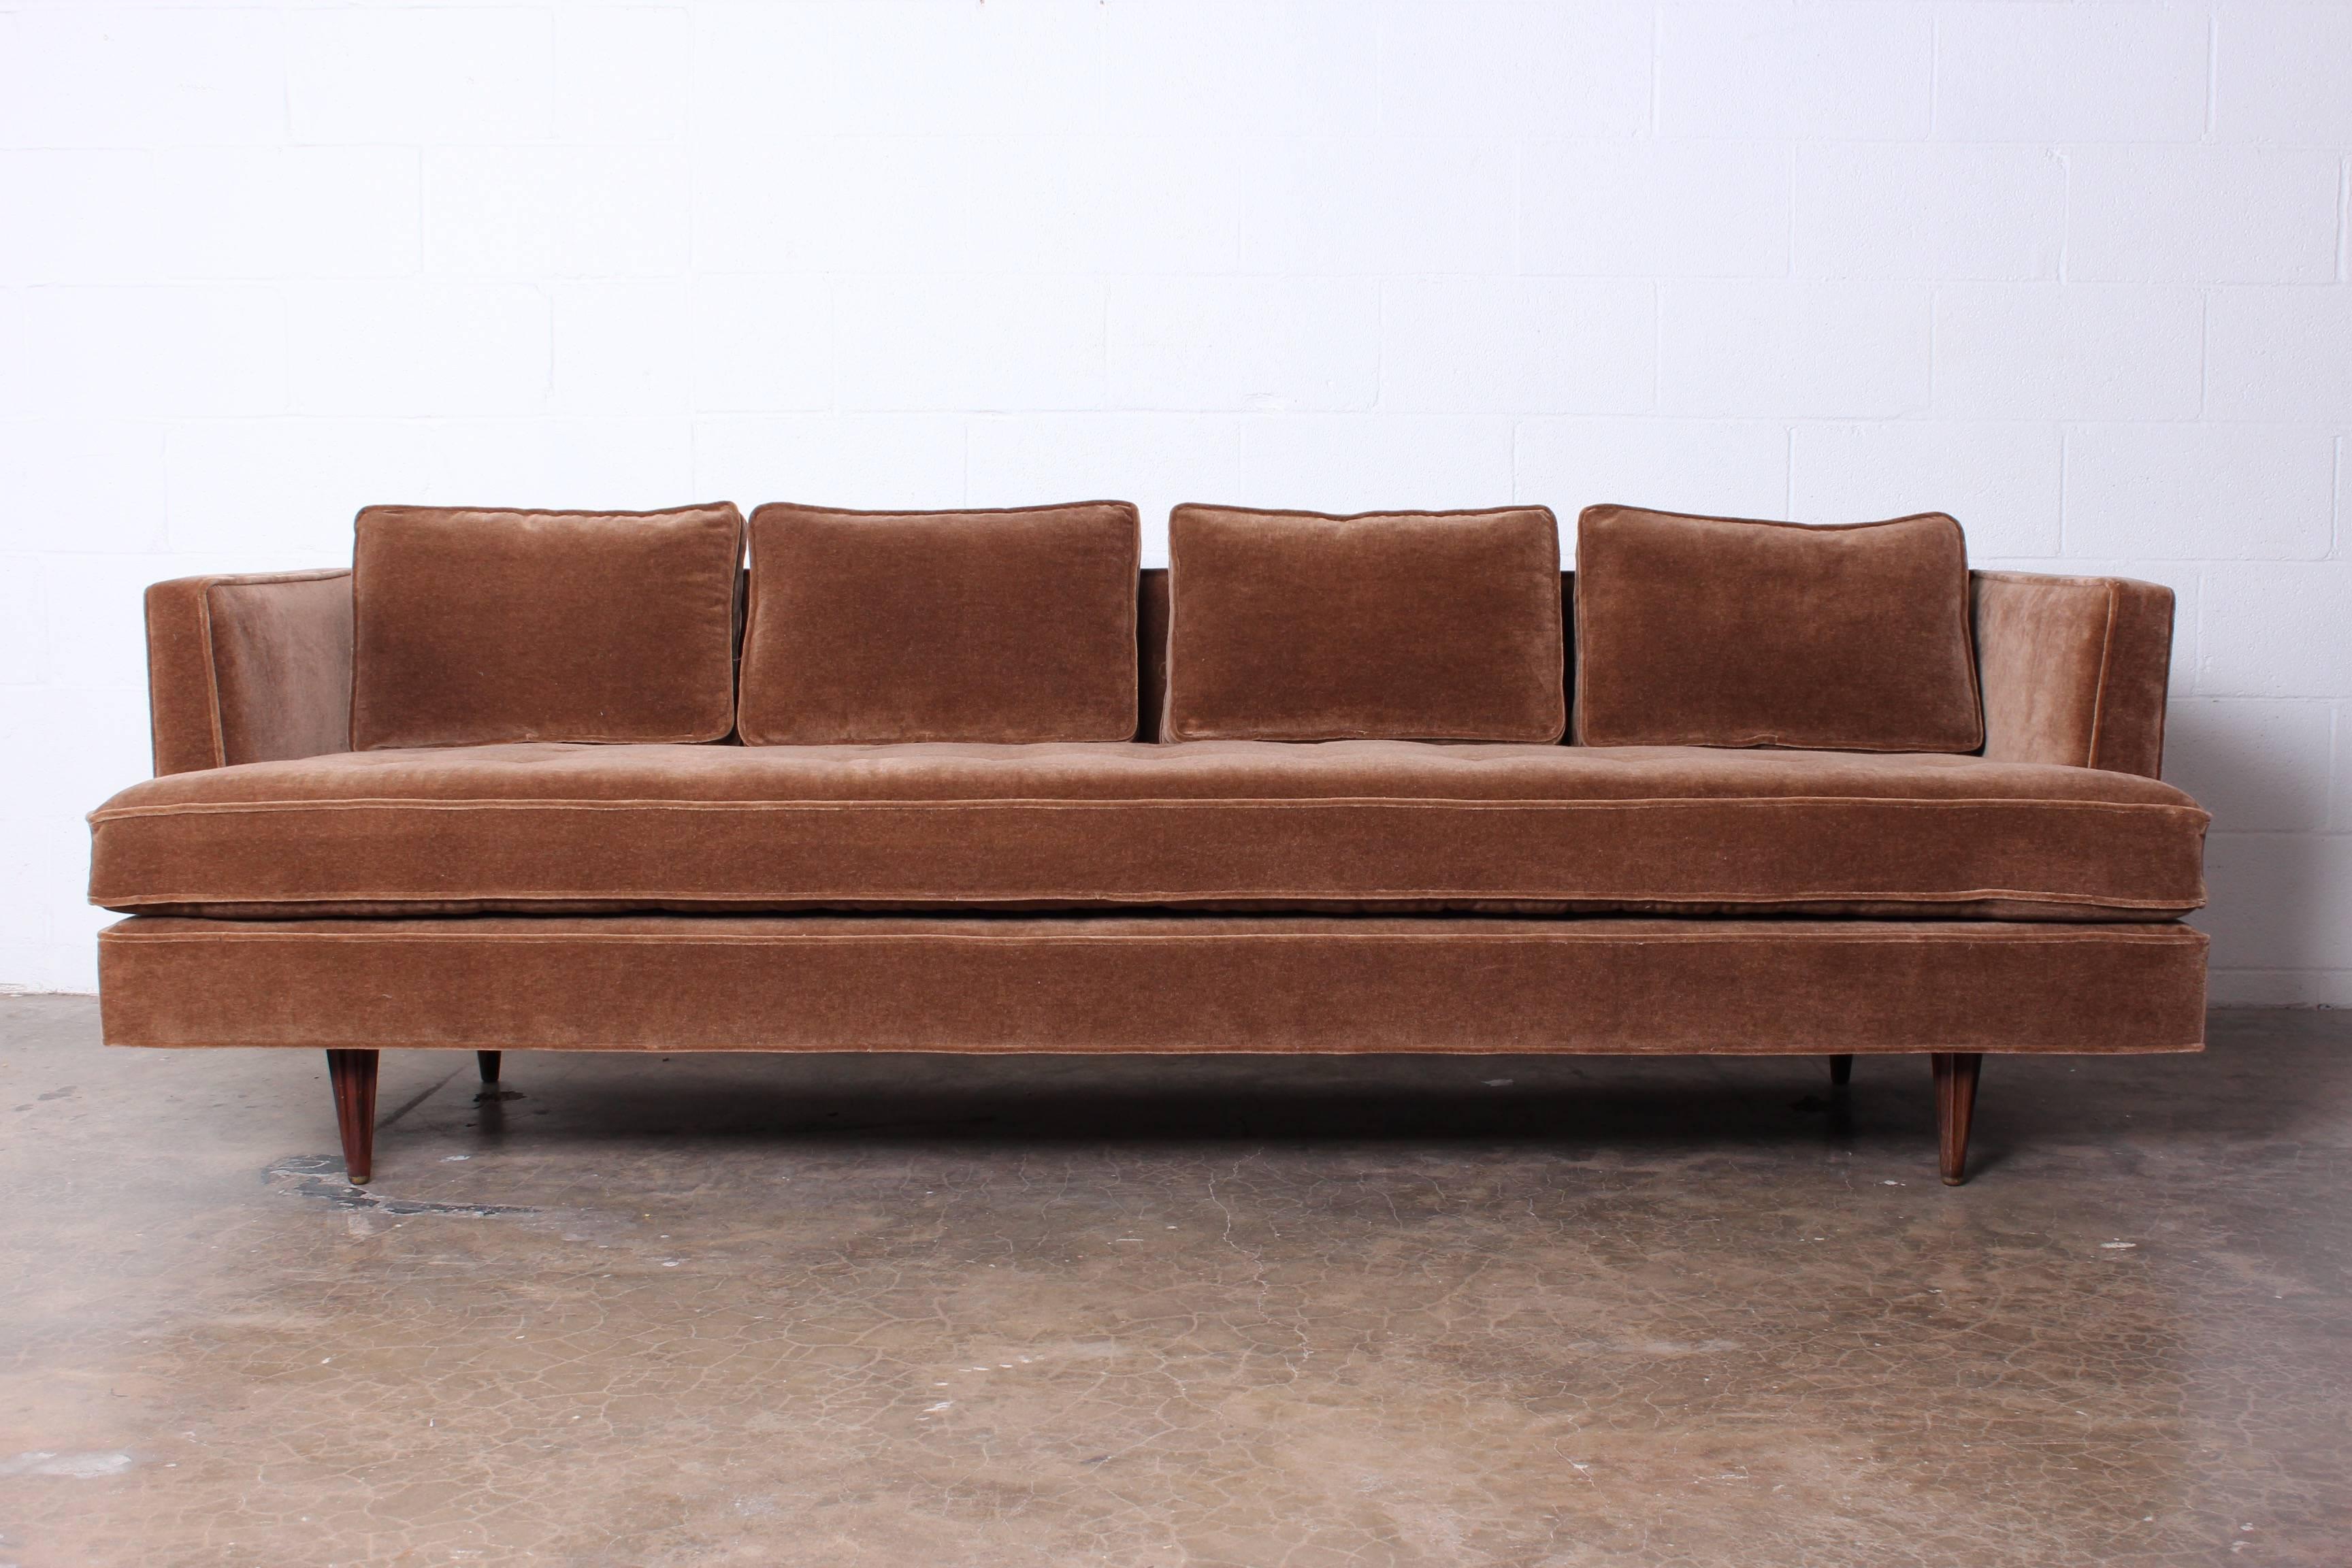 A Classic Dunbar sofa fully restored with mohair fabric and down cushions. This version has rare fluted rosewood legs with brass tips. Designed by Edward Wormley.